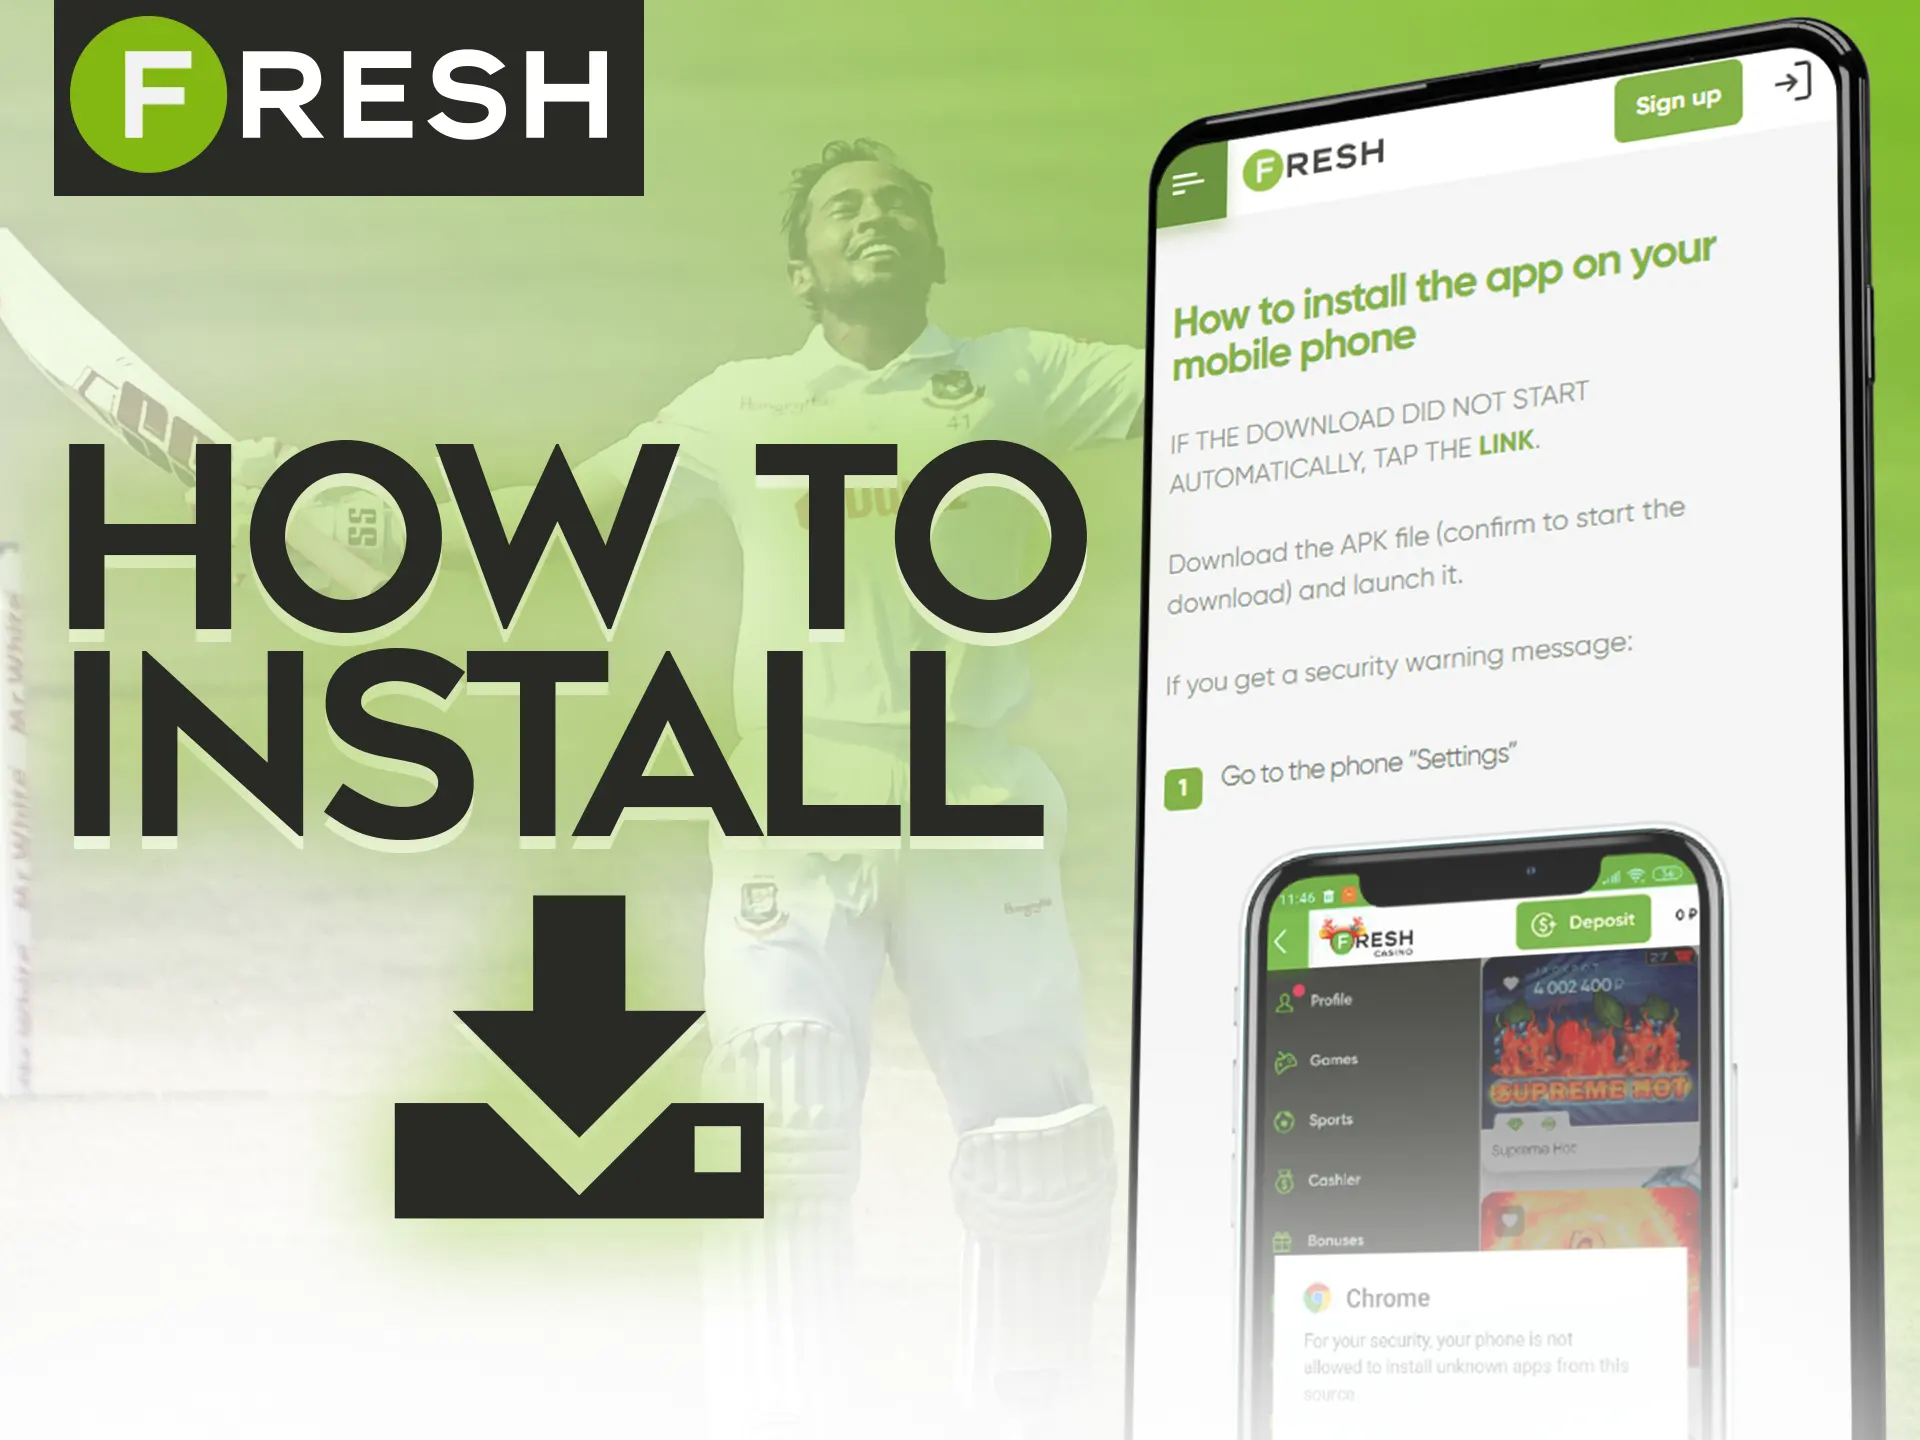 It's easy to install Fresh Casino app on your mobile device.